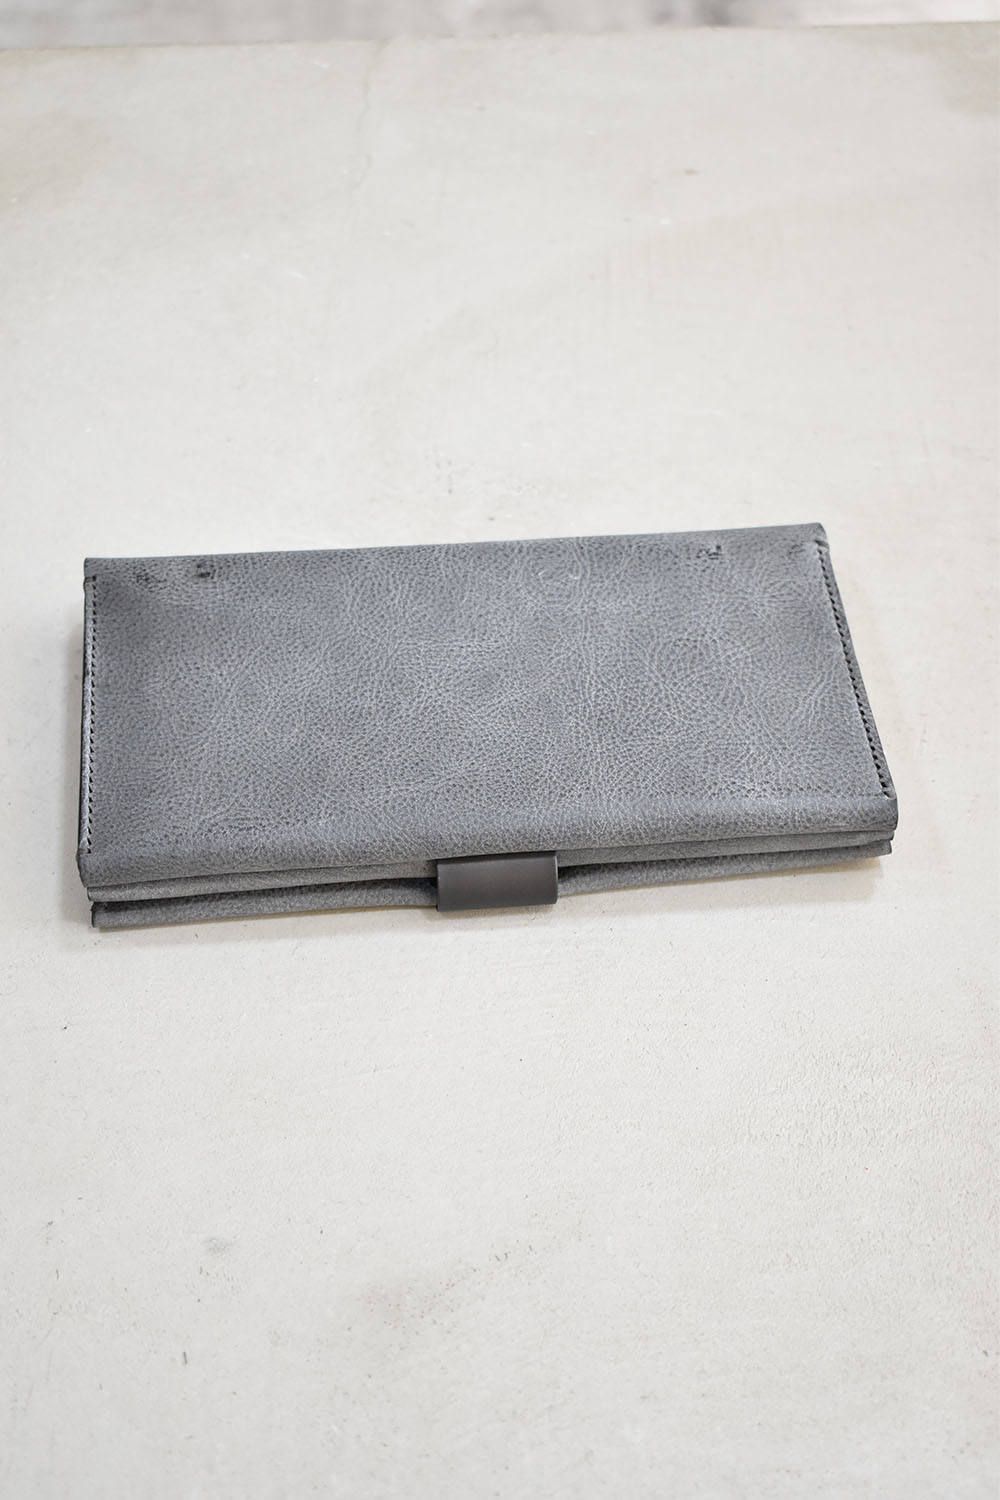 Cow Leather Long Wallet【アイスグレー】